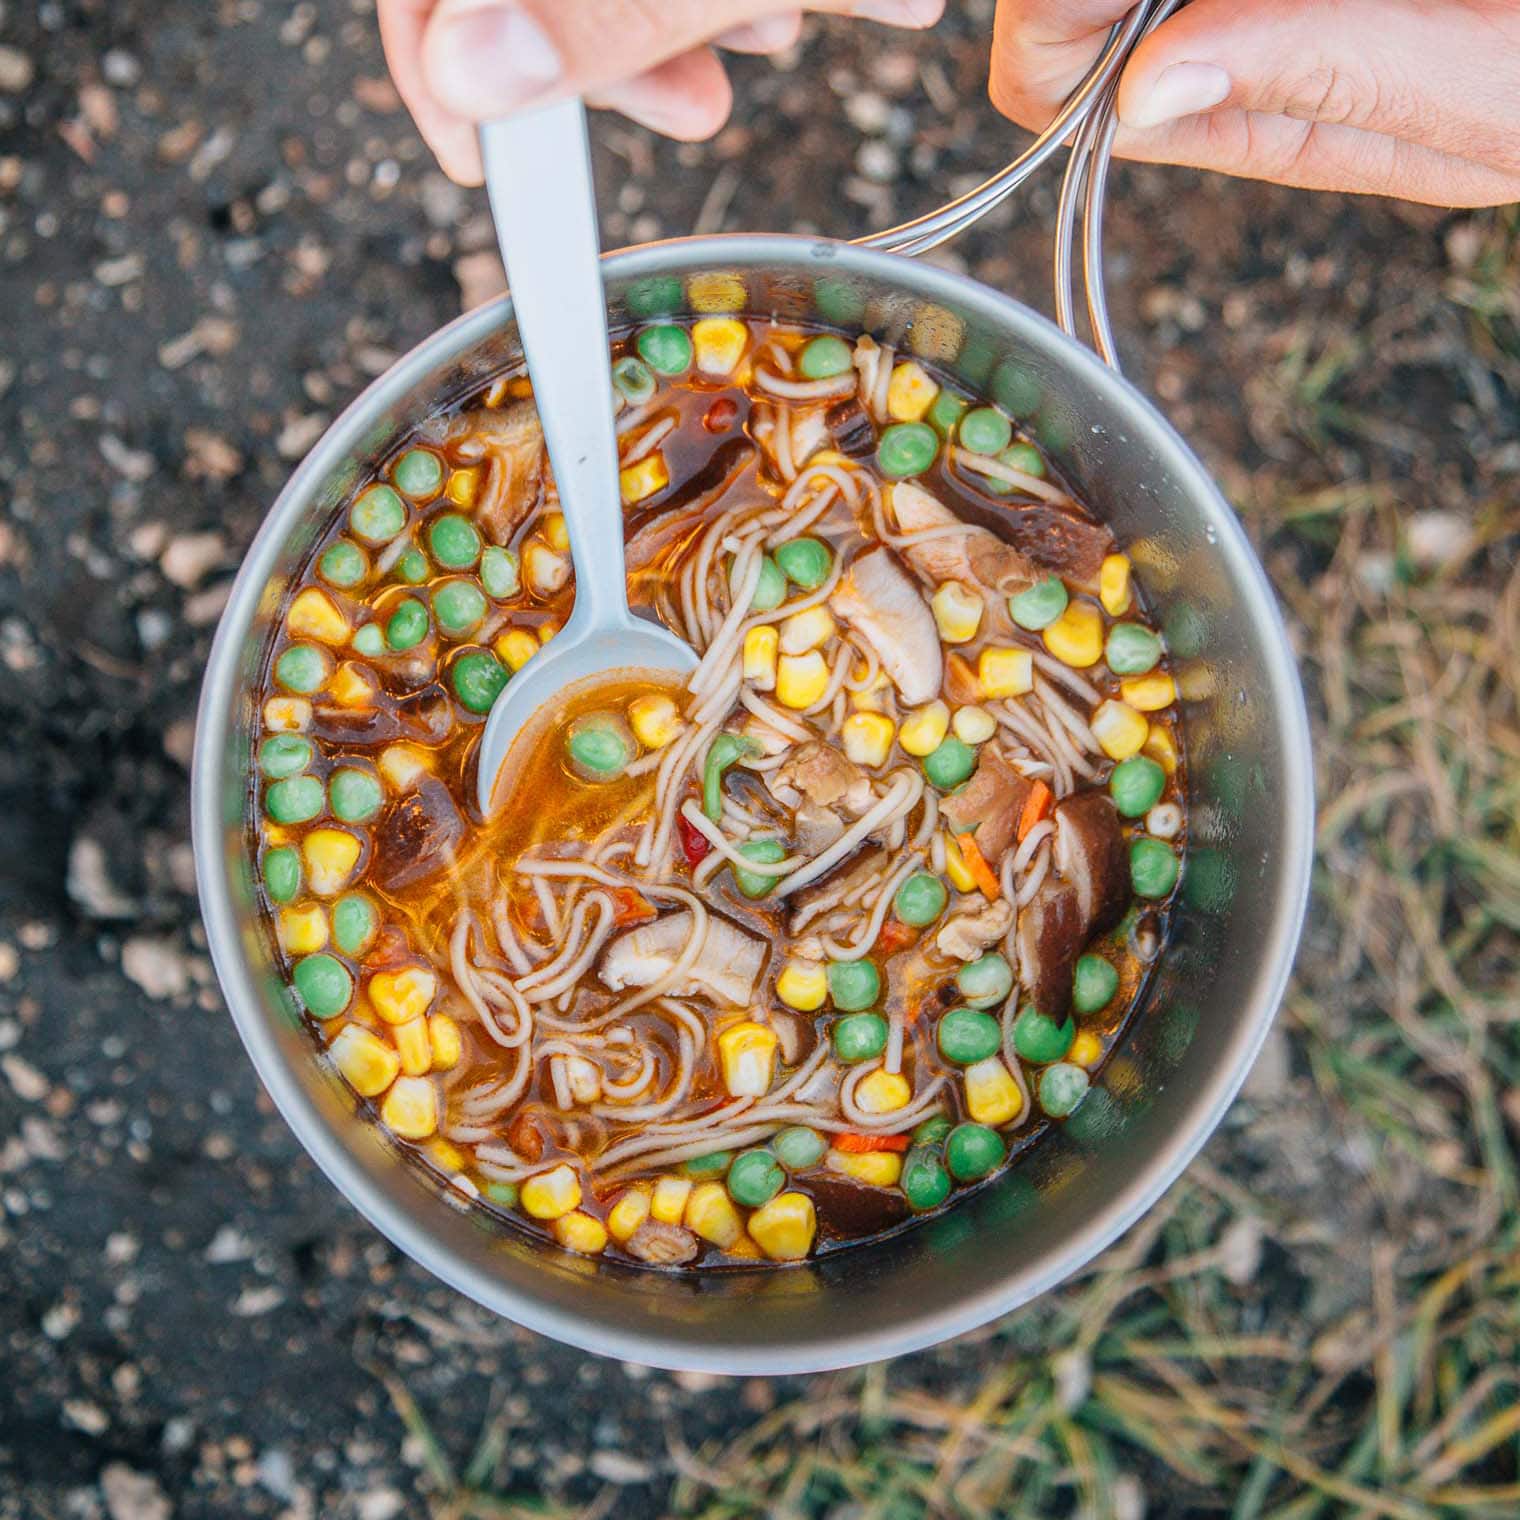 Ramen noodles, vegetables, and broth in a backpacking pot. A hand and spoon are reaching in.